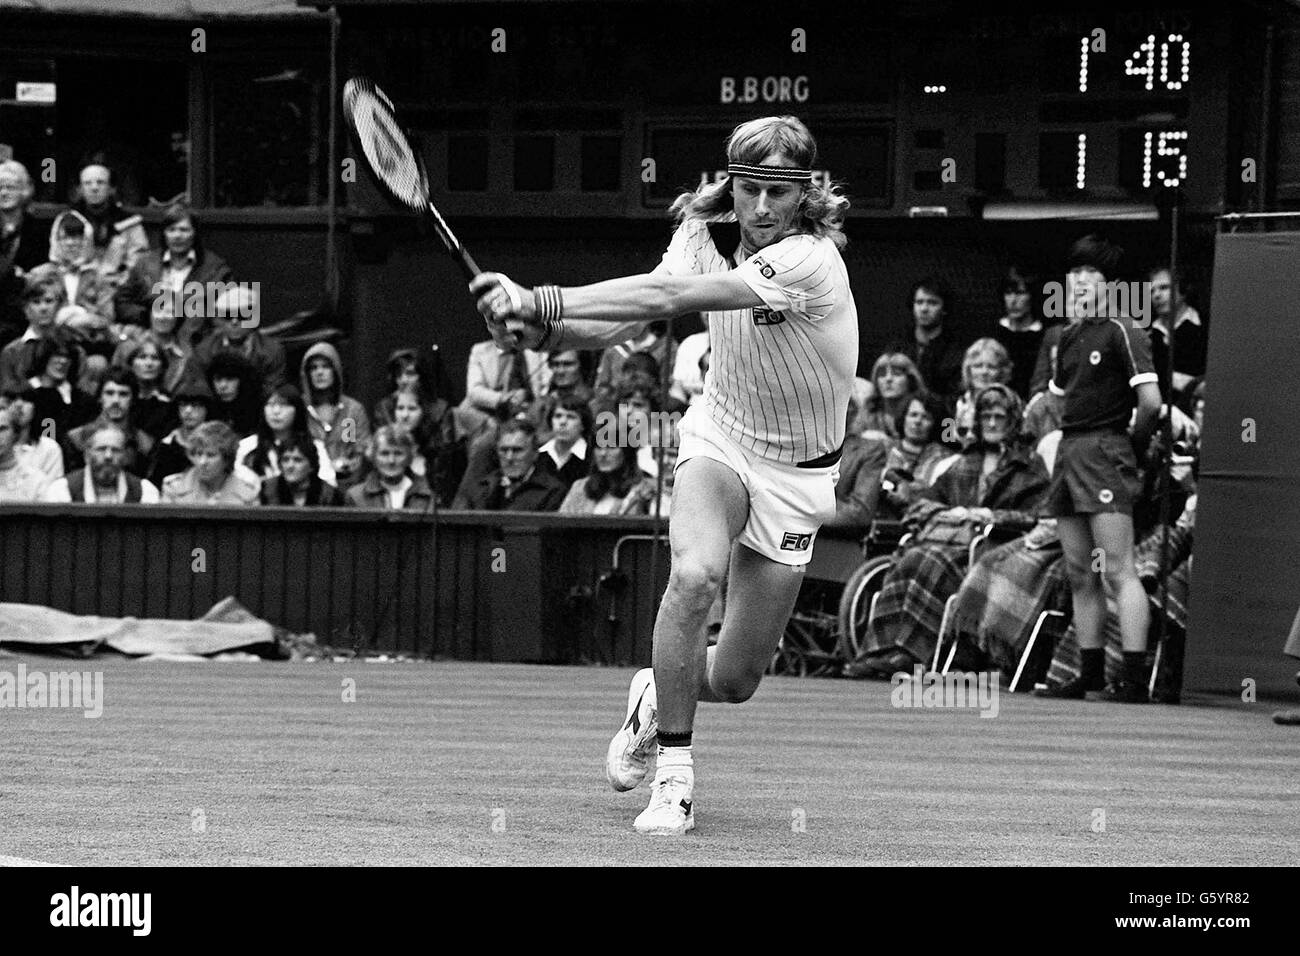 Bjorn Borg High Resolution Stock Photography and Images - Alamy